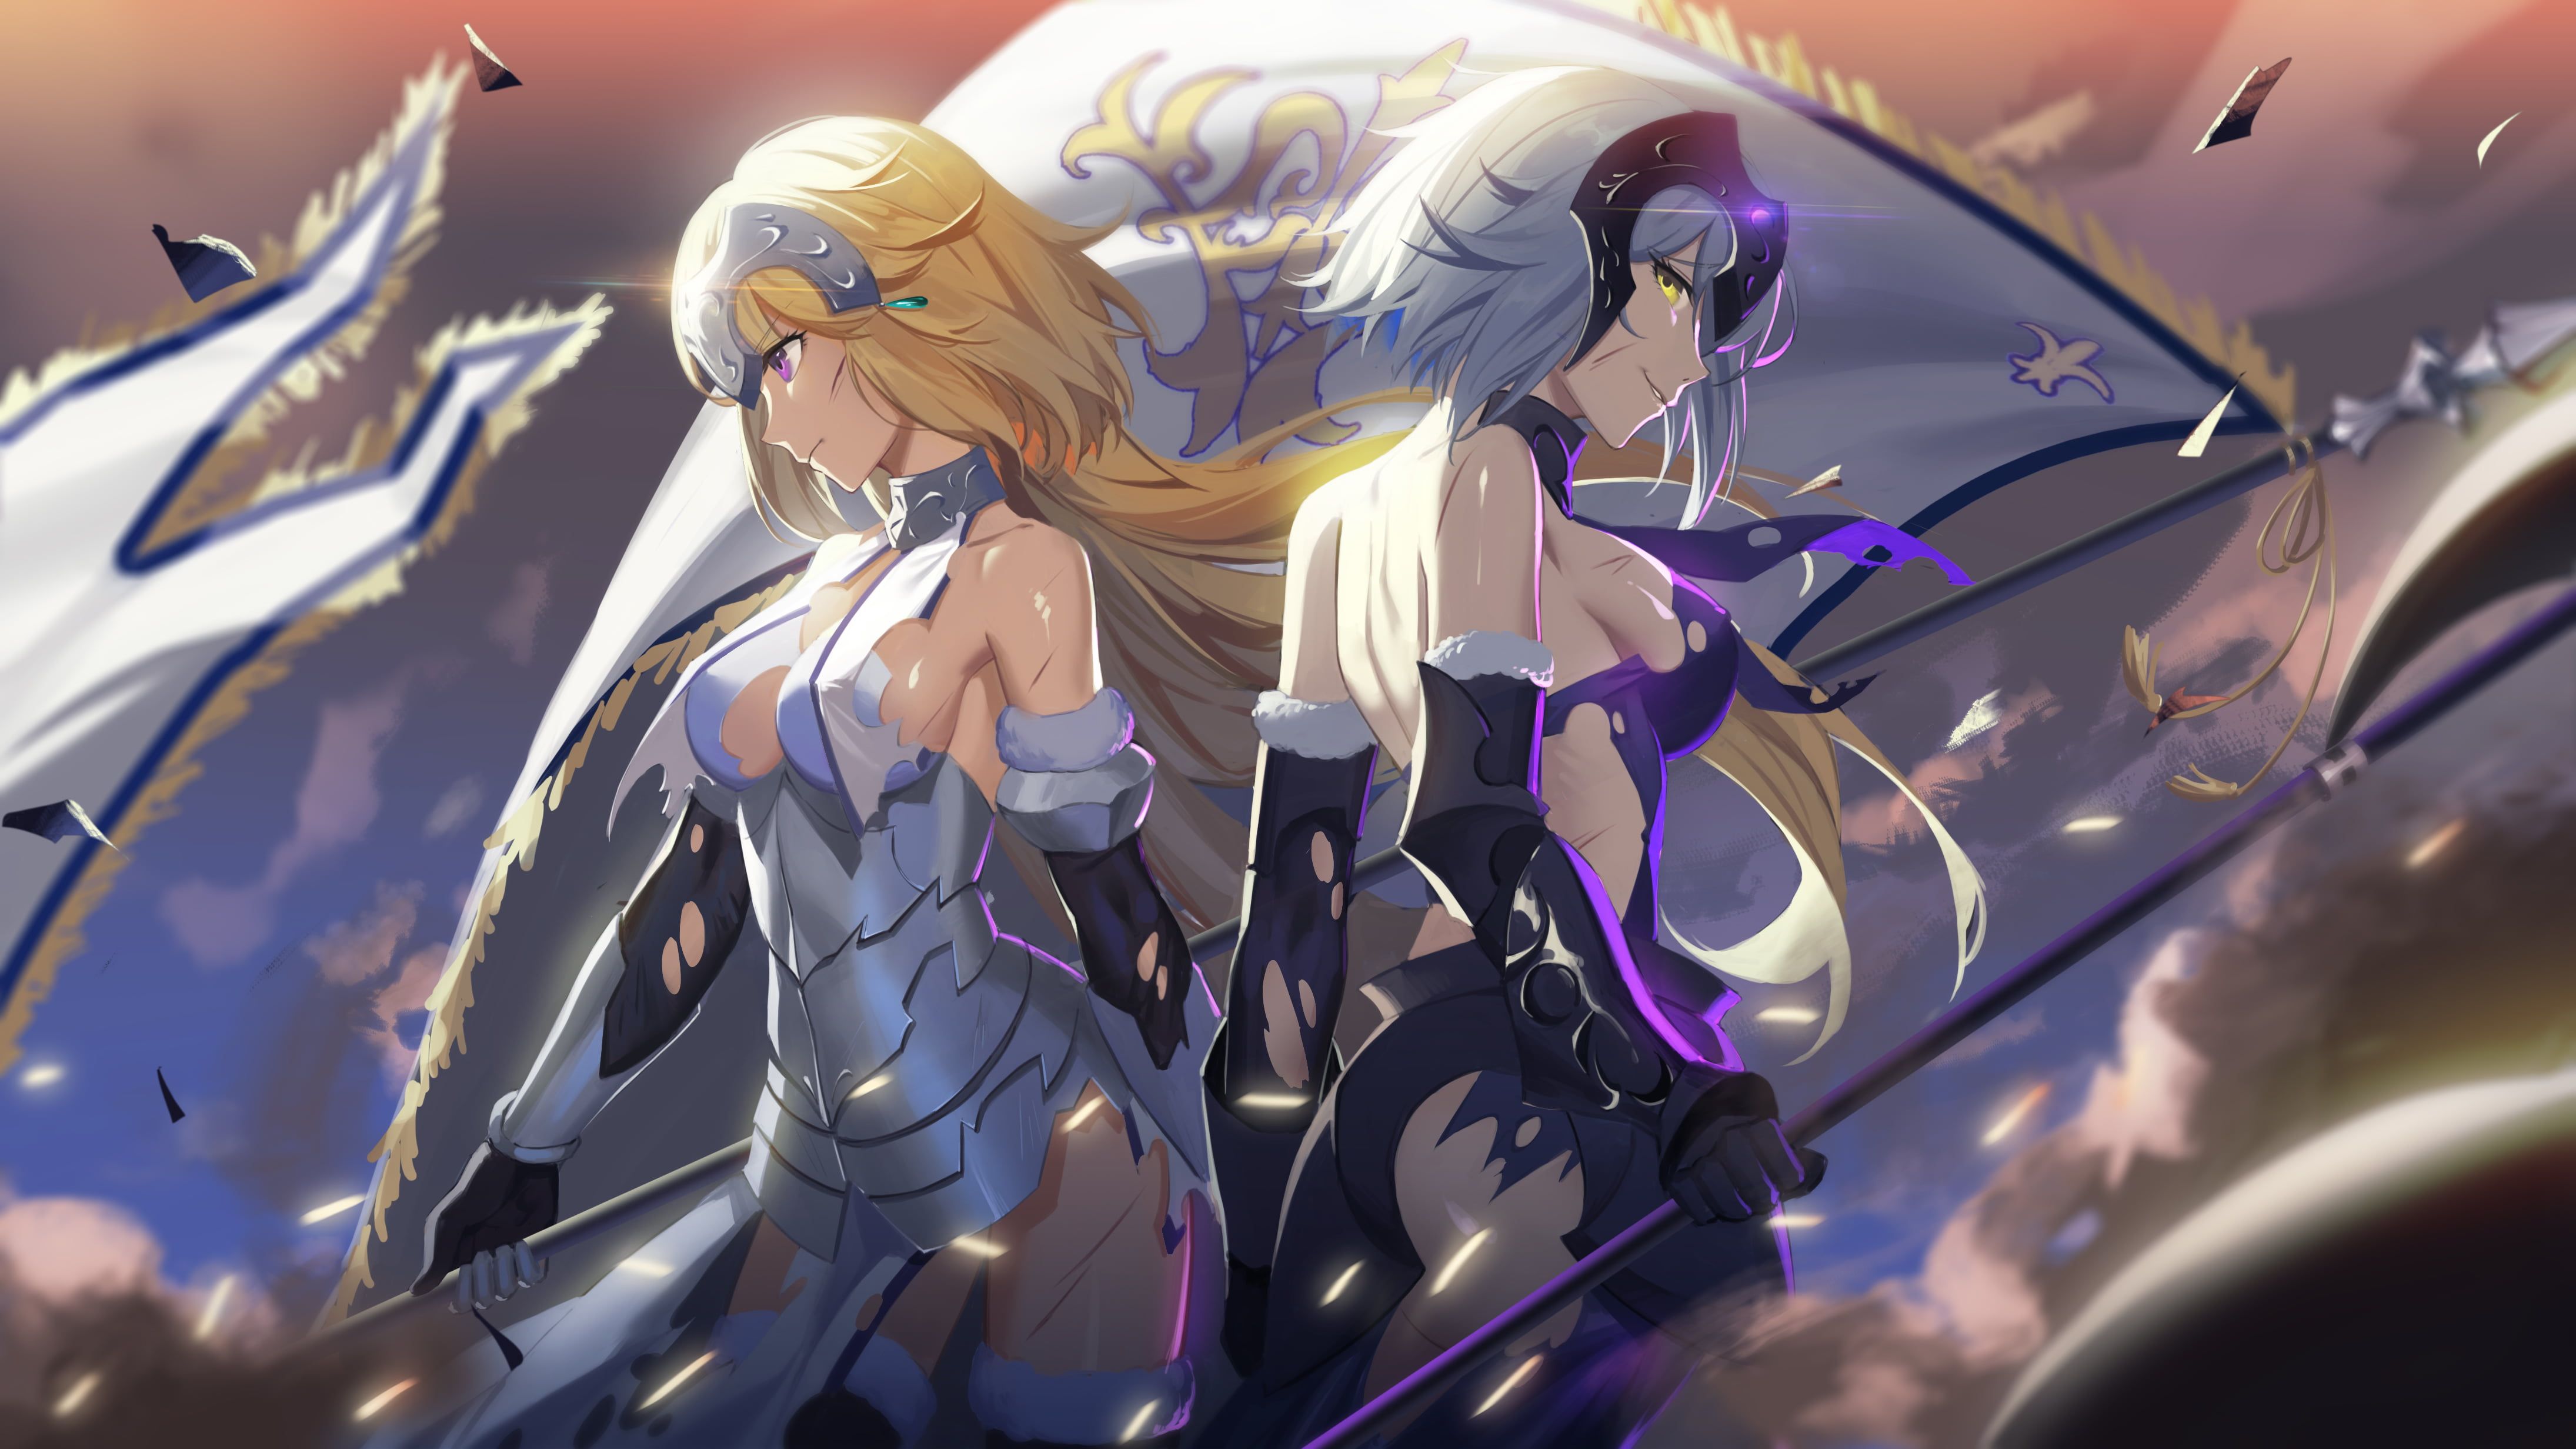 Two White And Yellow Haired Women Anime Characters Wallpaper Fate Series #anime Anime Girls Fate Grand Order Jeanne D'Arc In 2021. Anime Characters, Anime, Character Art